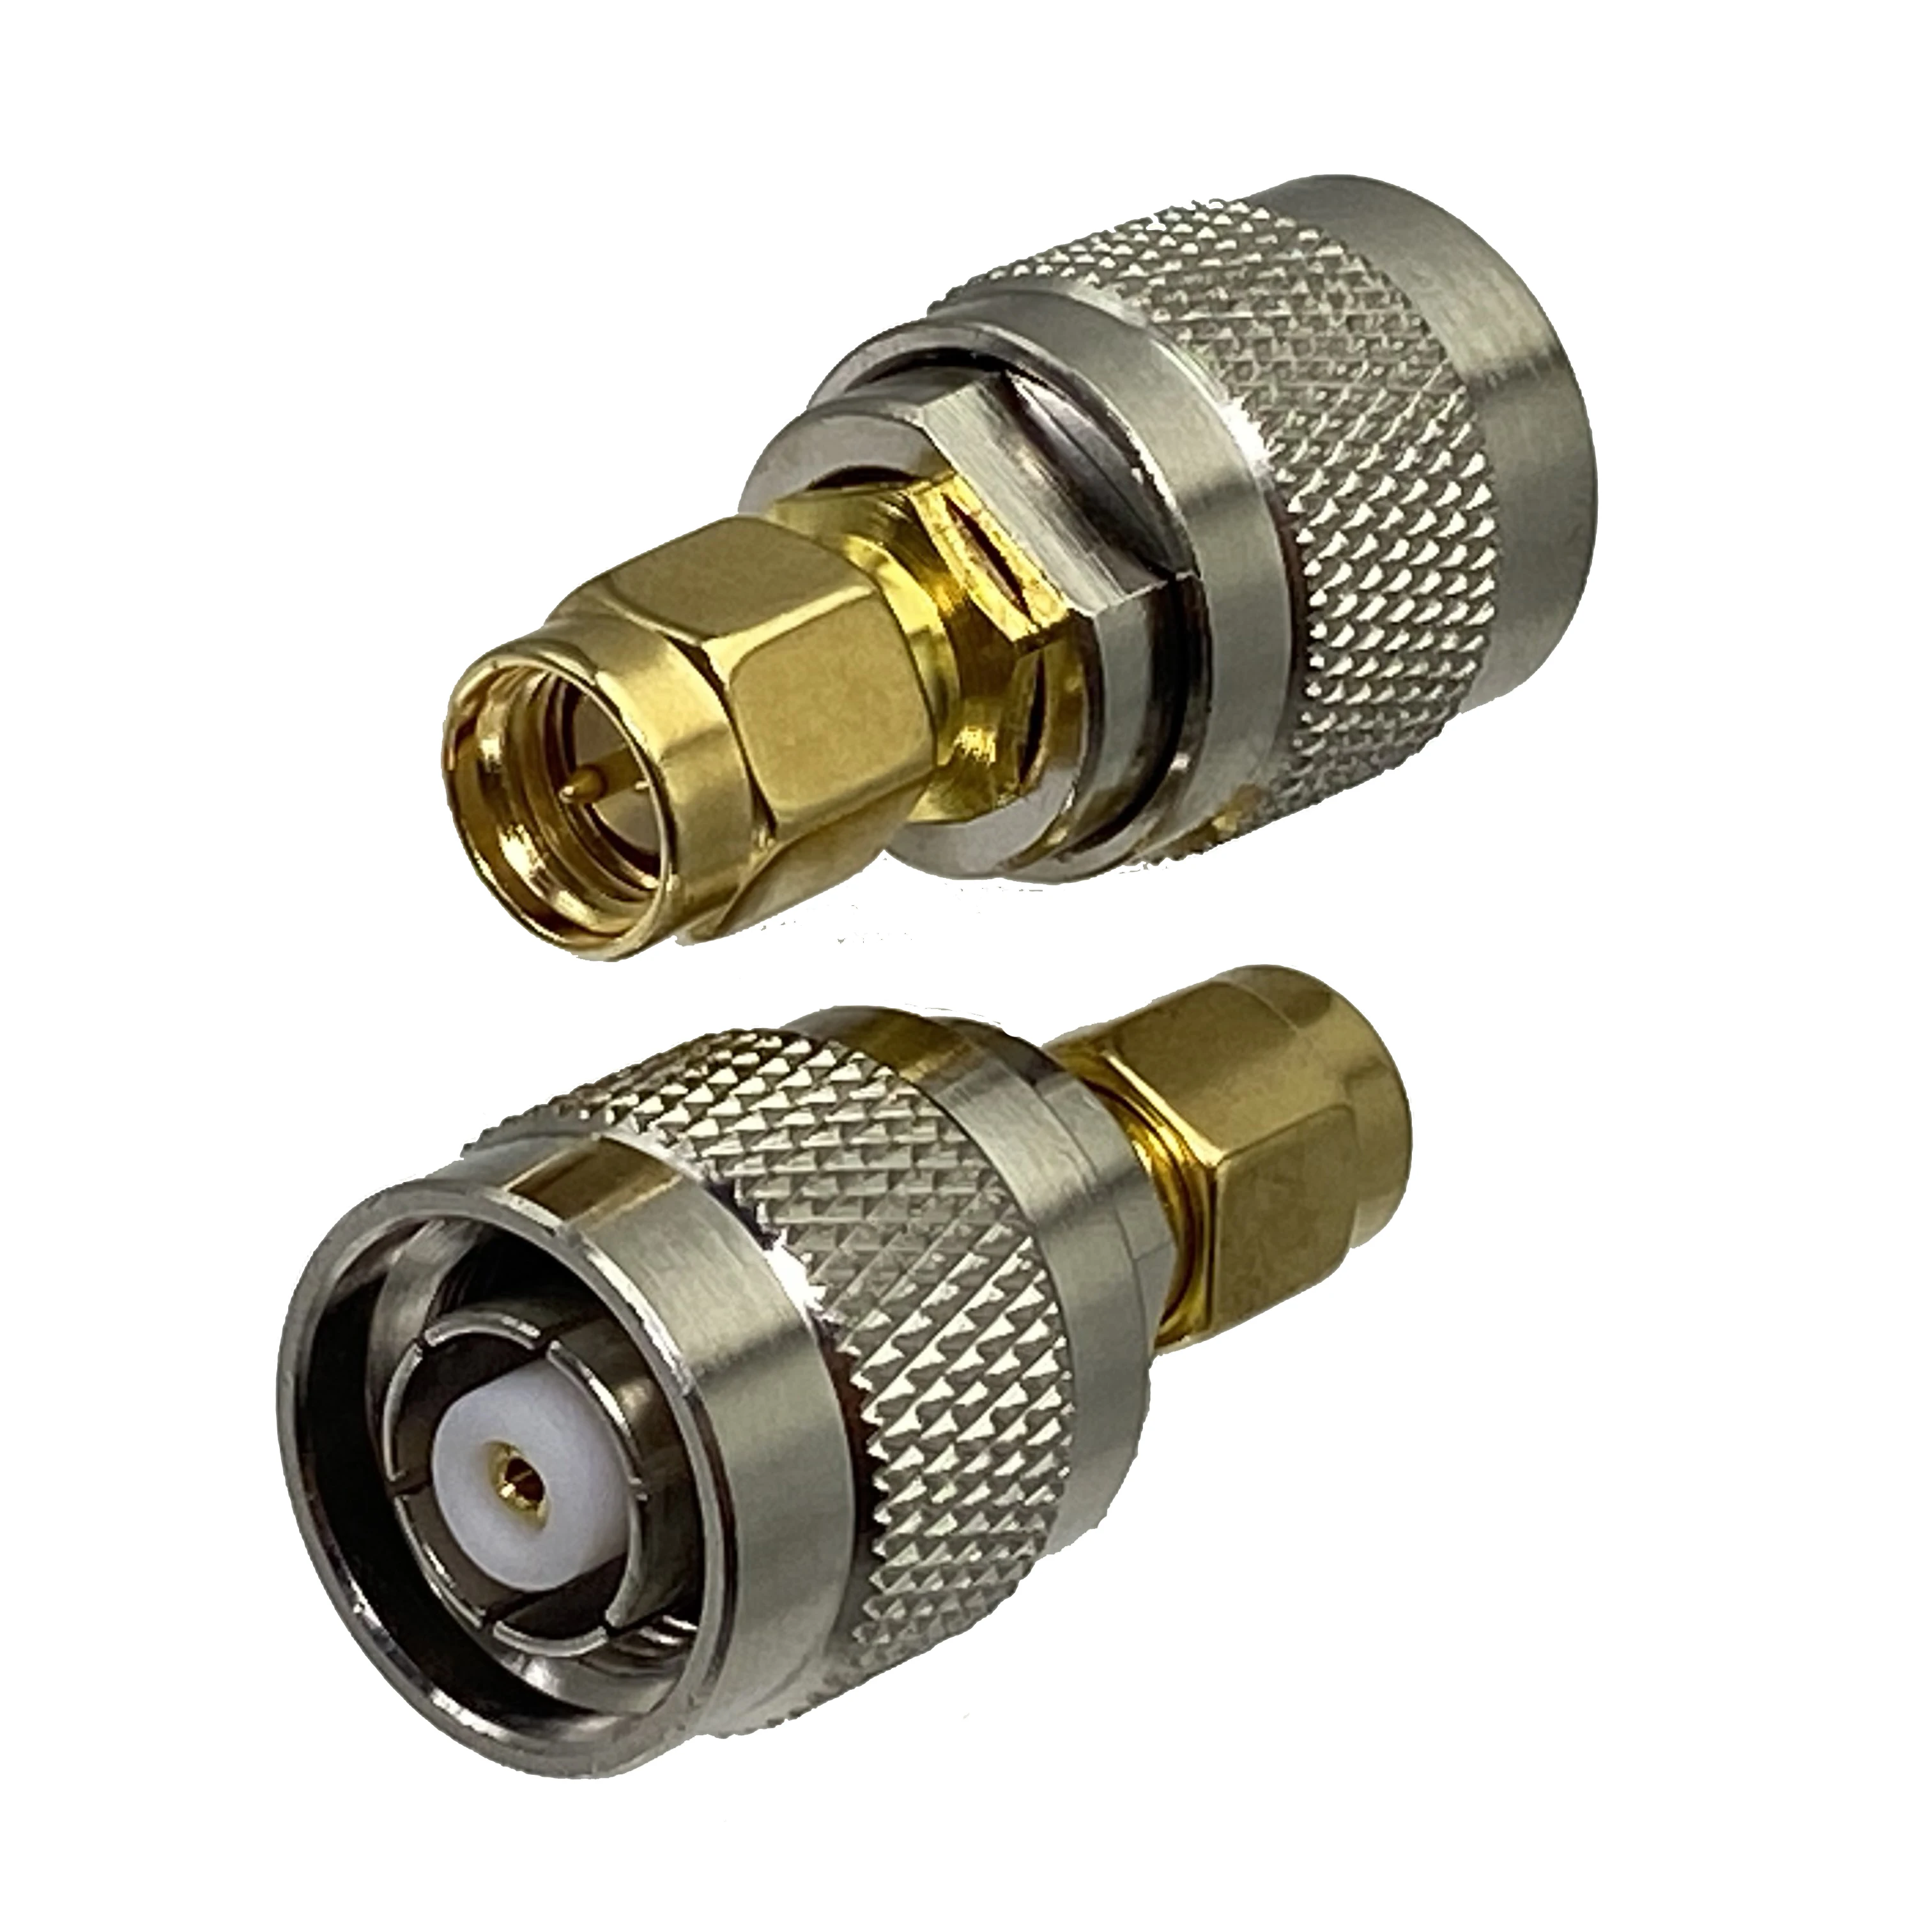 

1pcs Connector Adapter RP-TNC Male Jack to SMA Male Plug RF Coaxial Converter Straight New